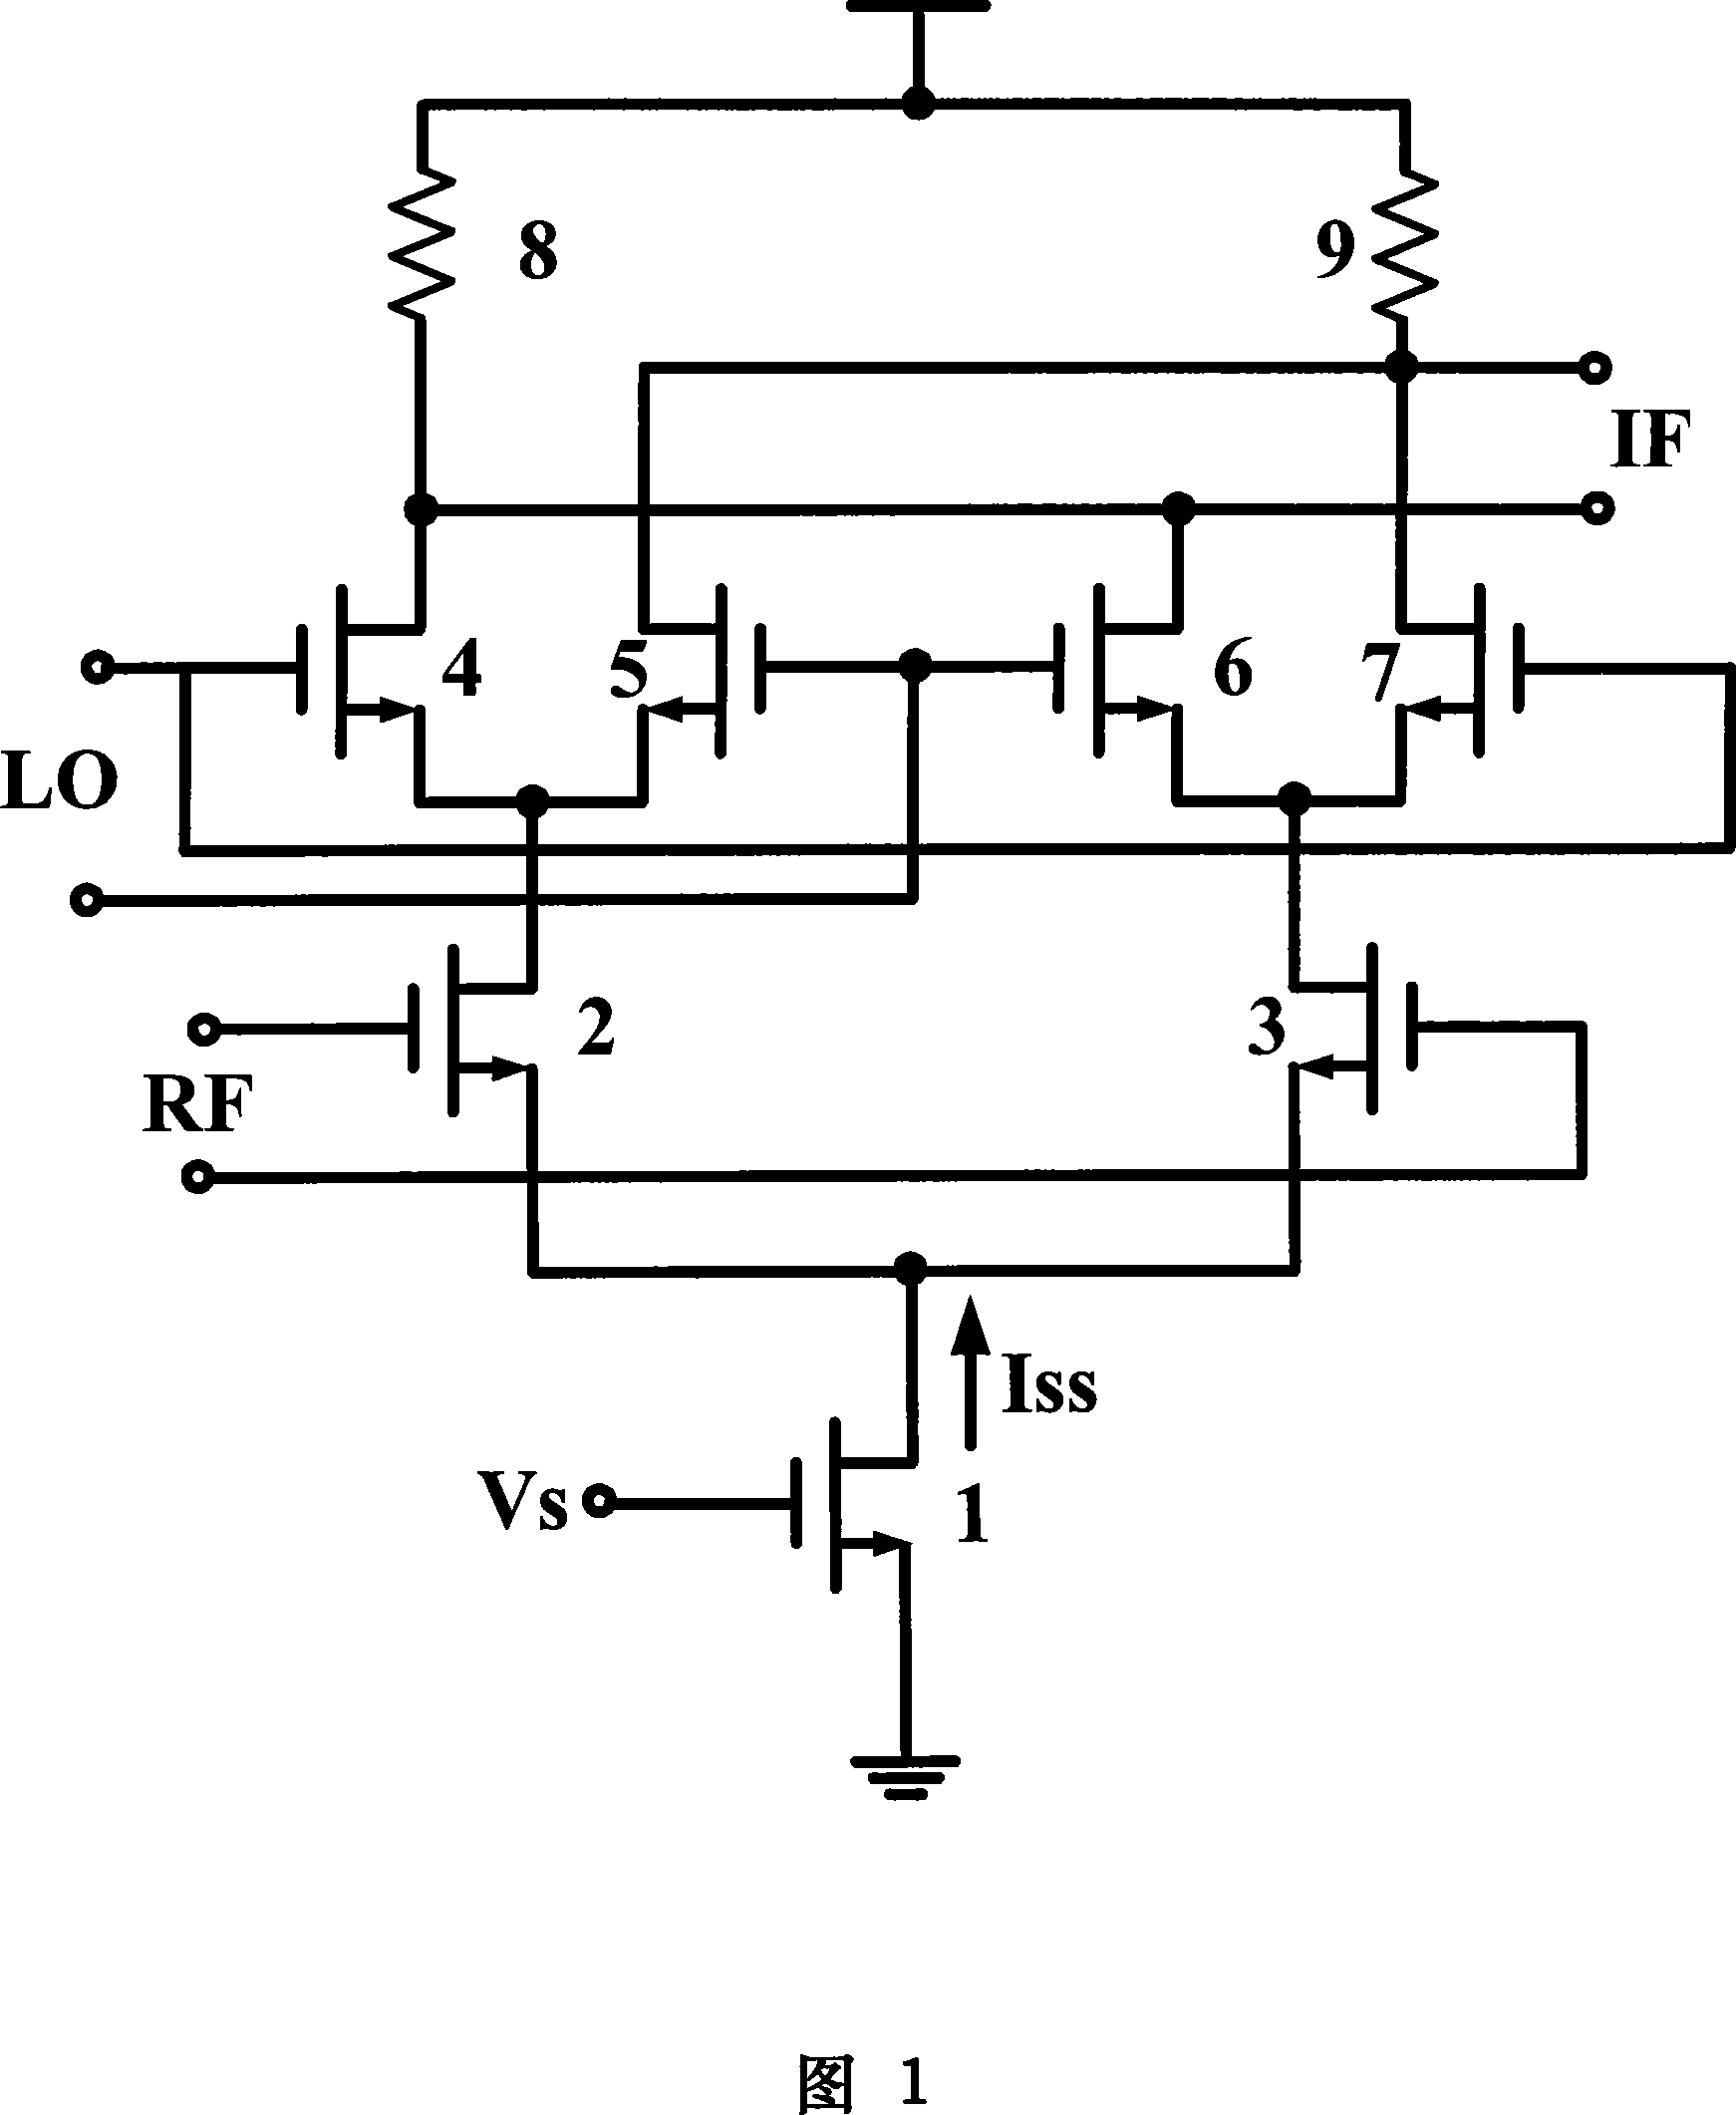 A low-voltage frequency mixer